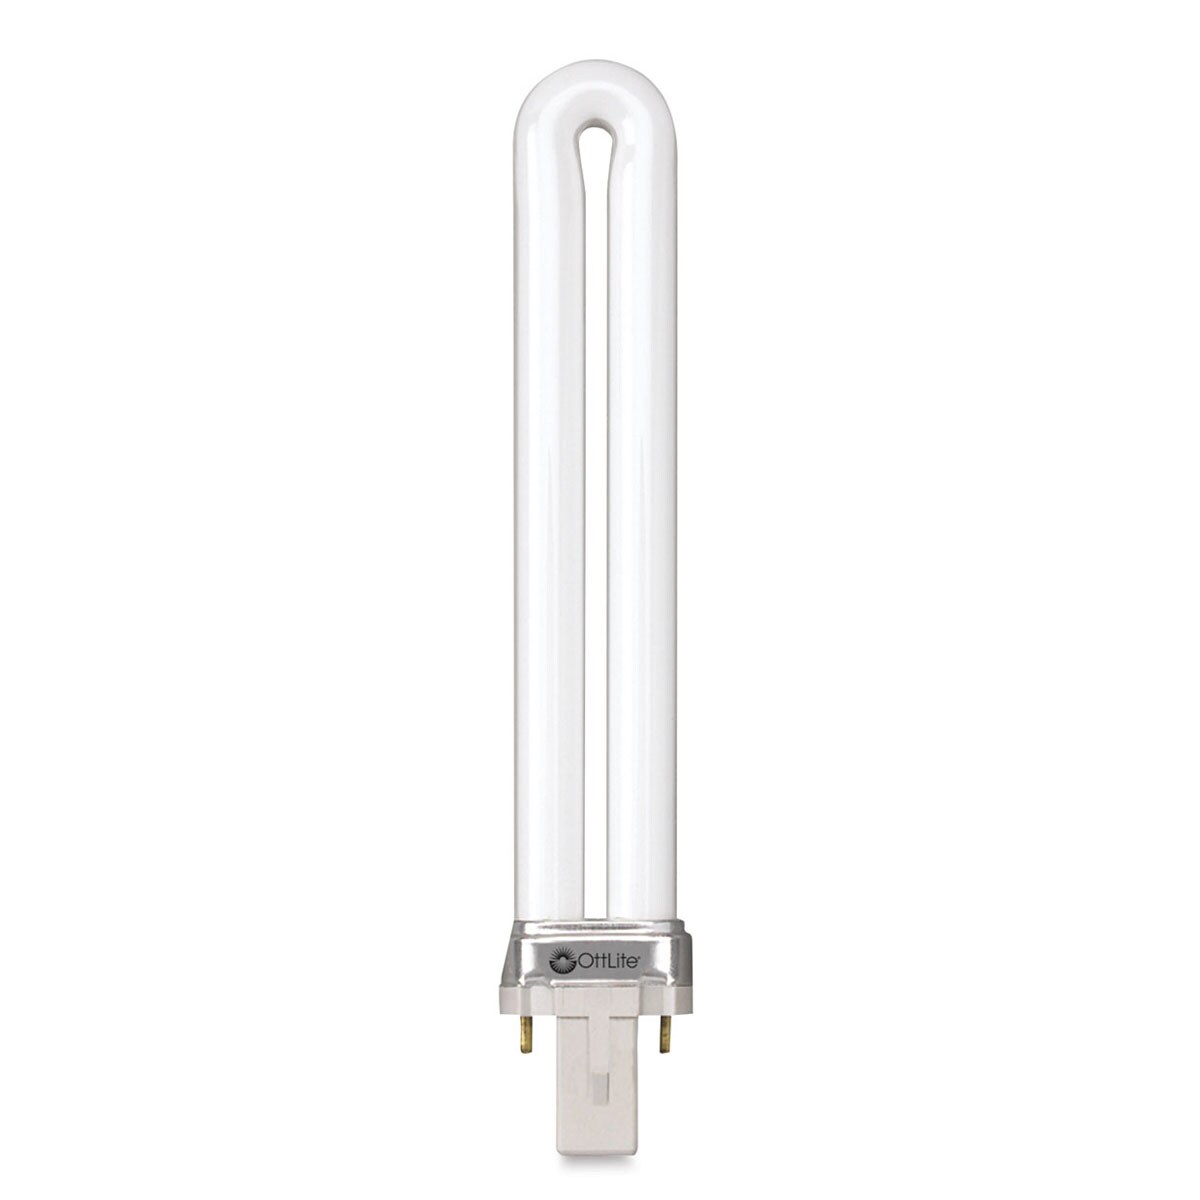 Ottlite 13W Replacement Bulb - E-Tube Type, For lamps newer than January 2008